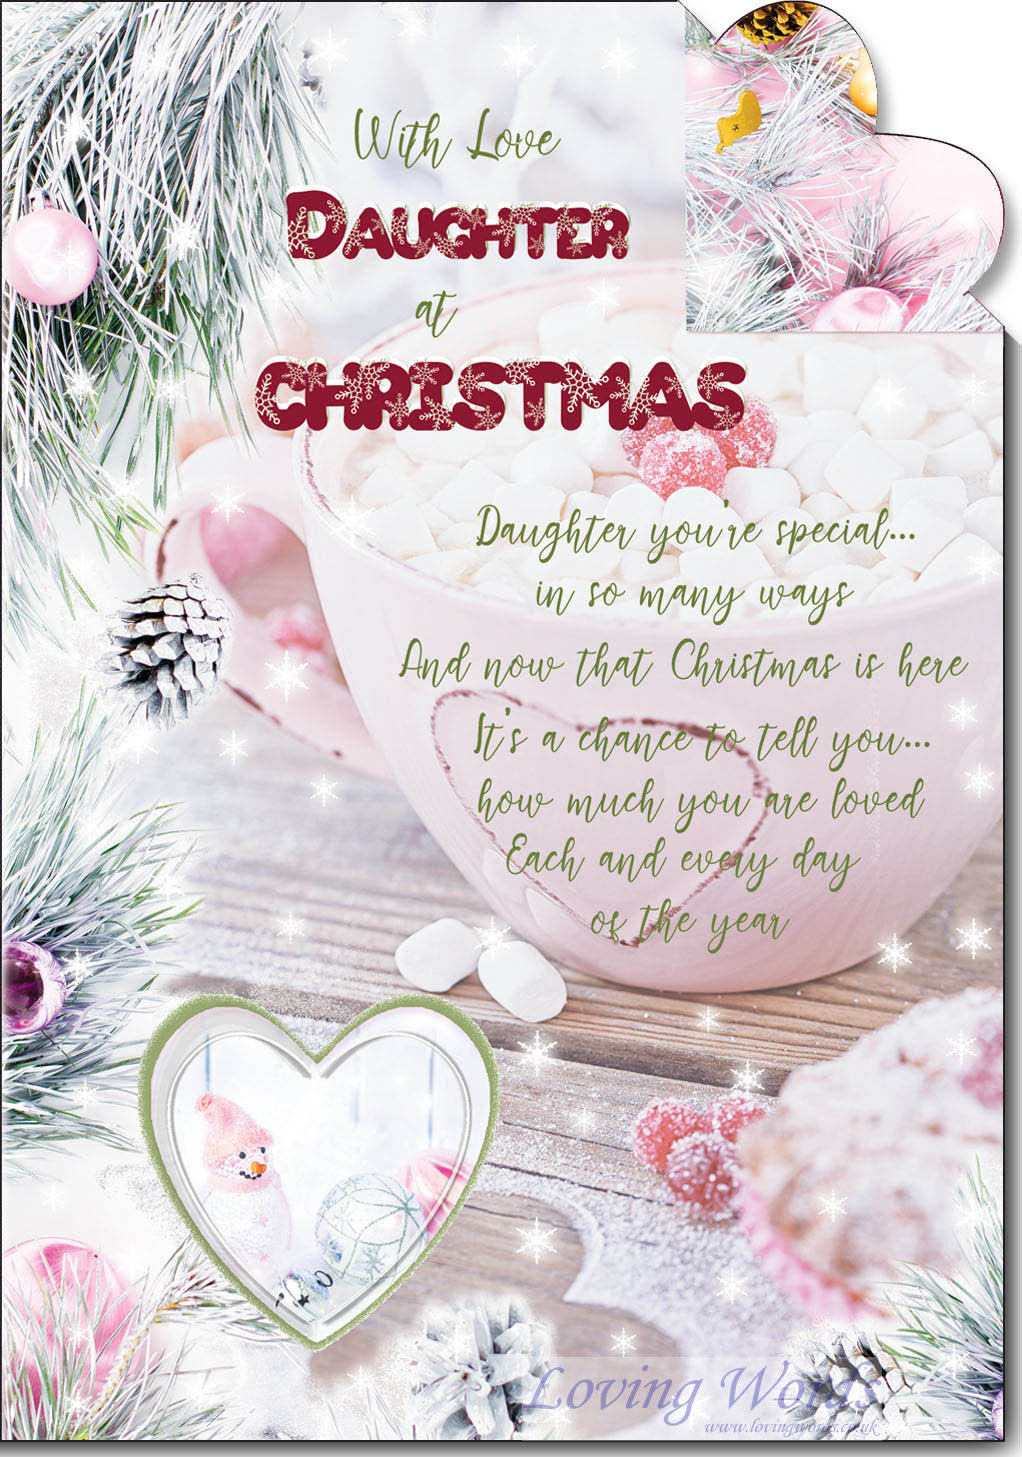 daughter-at-christmas-greeting-cards-by-loving-words